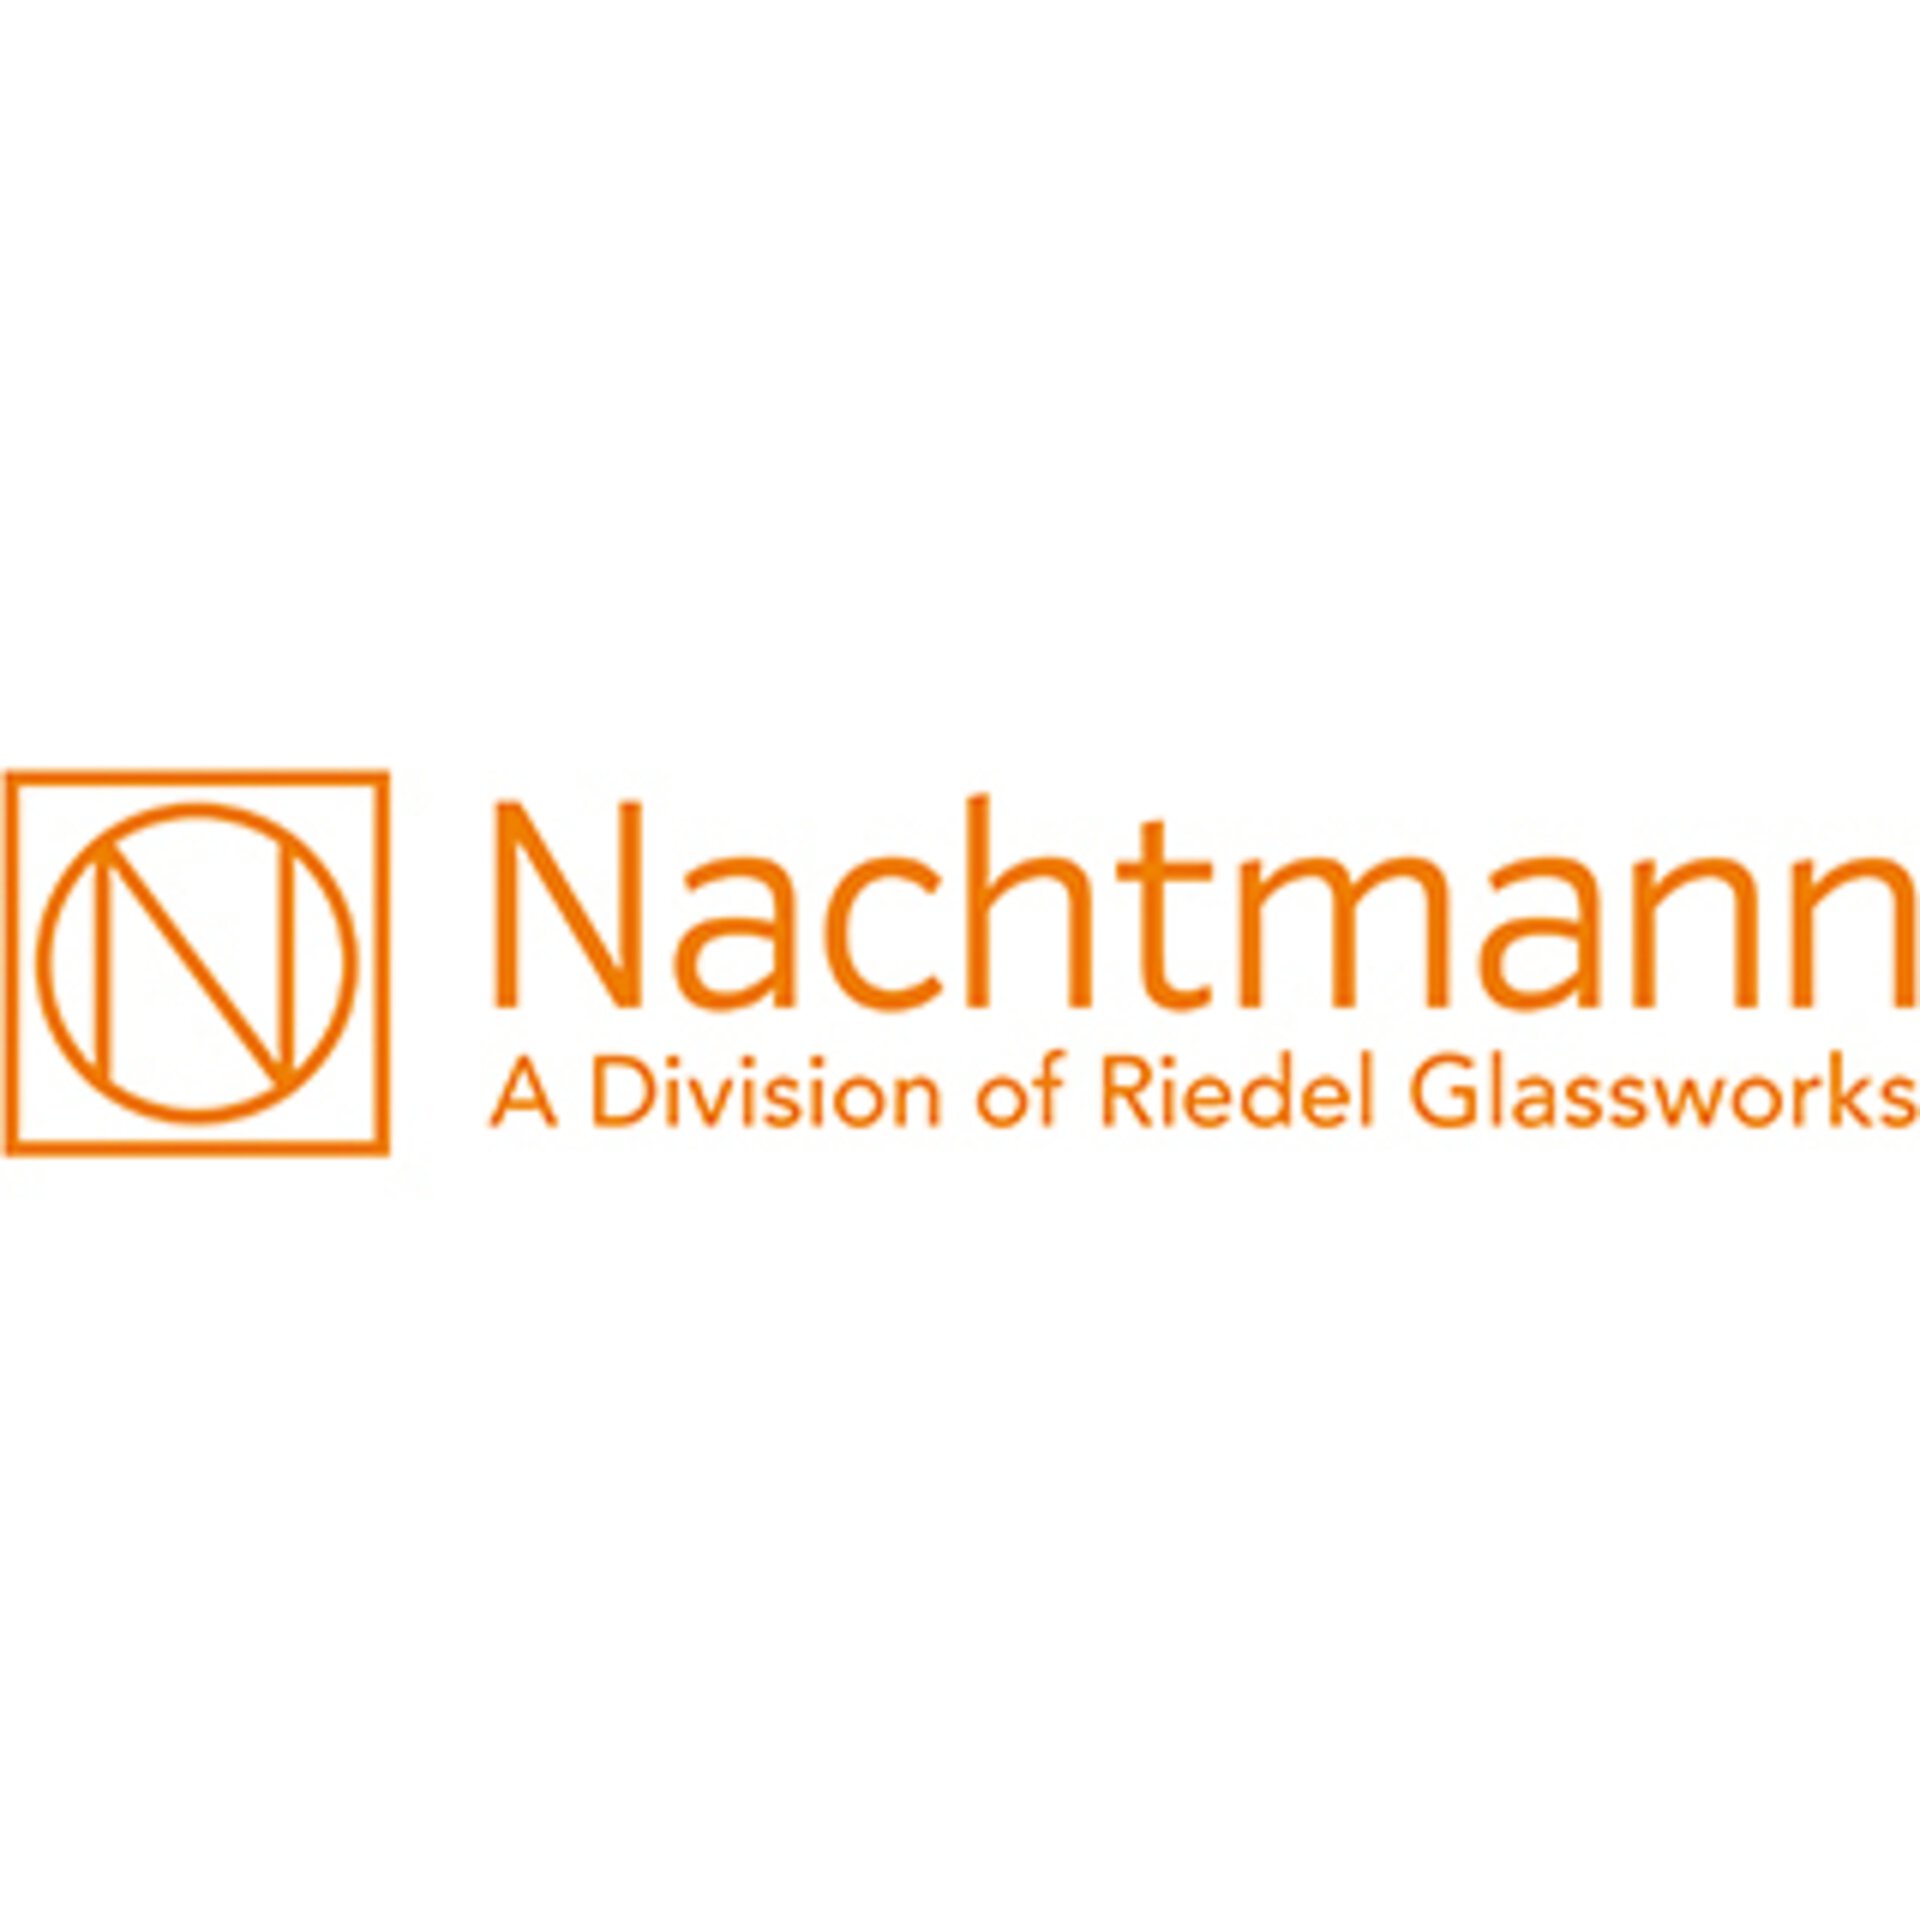 Logo "Nachtmann - a division of Riedel Glassworks"